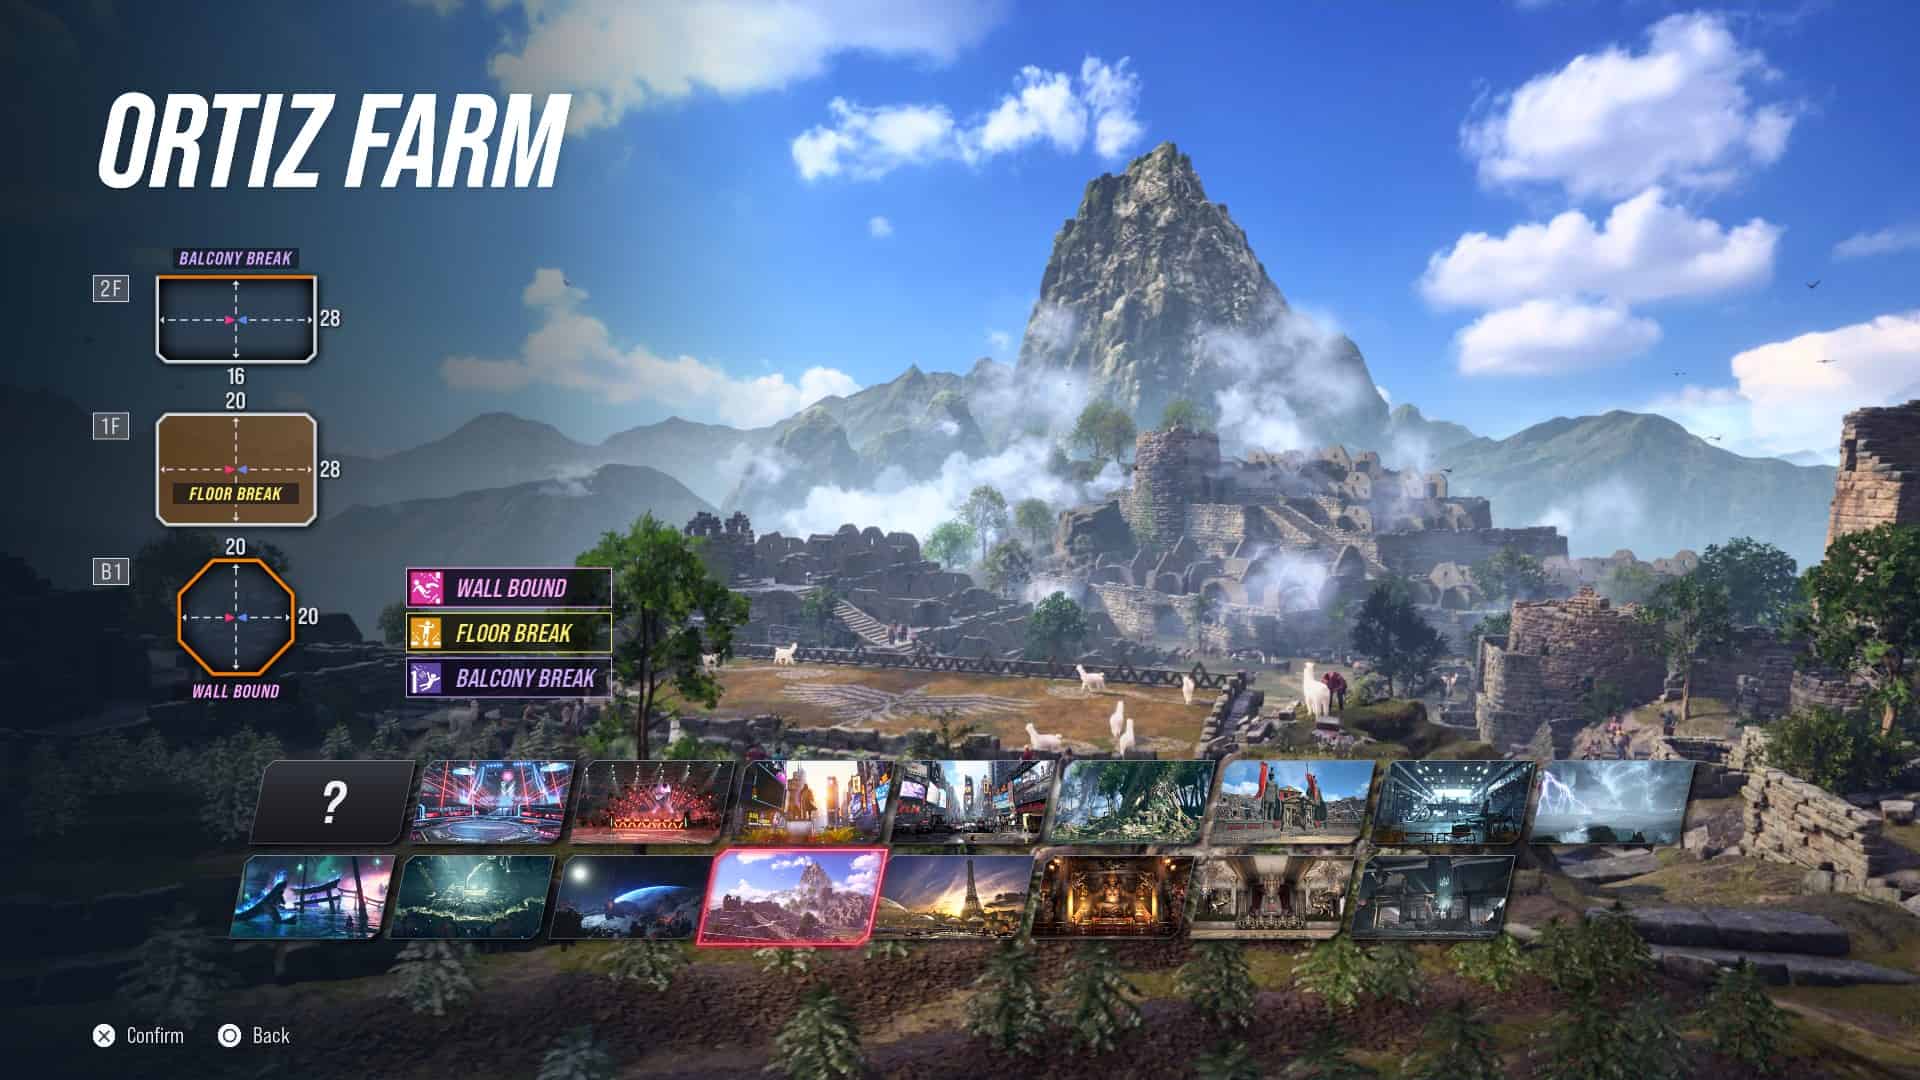 Tekken 8 stages: The Ortiz Farm stage in the stage select screen